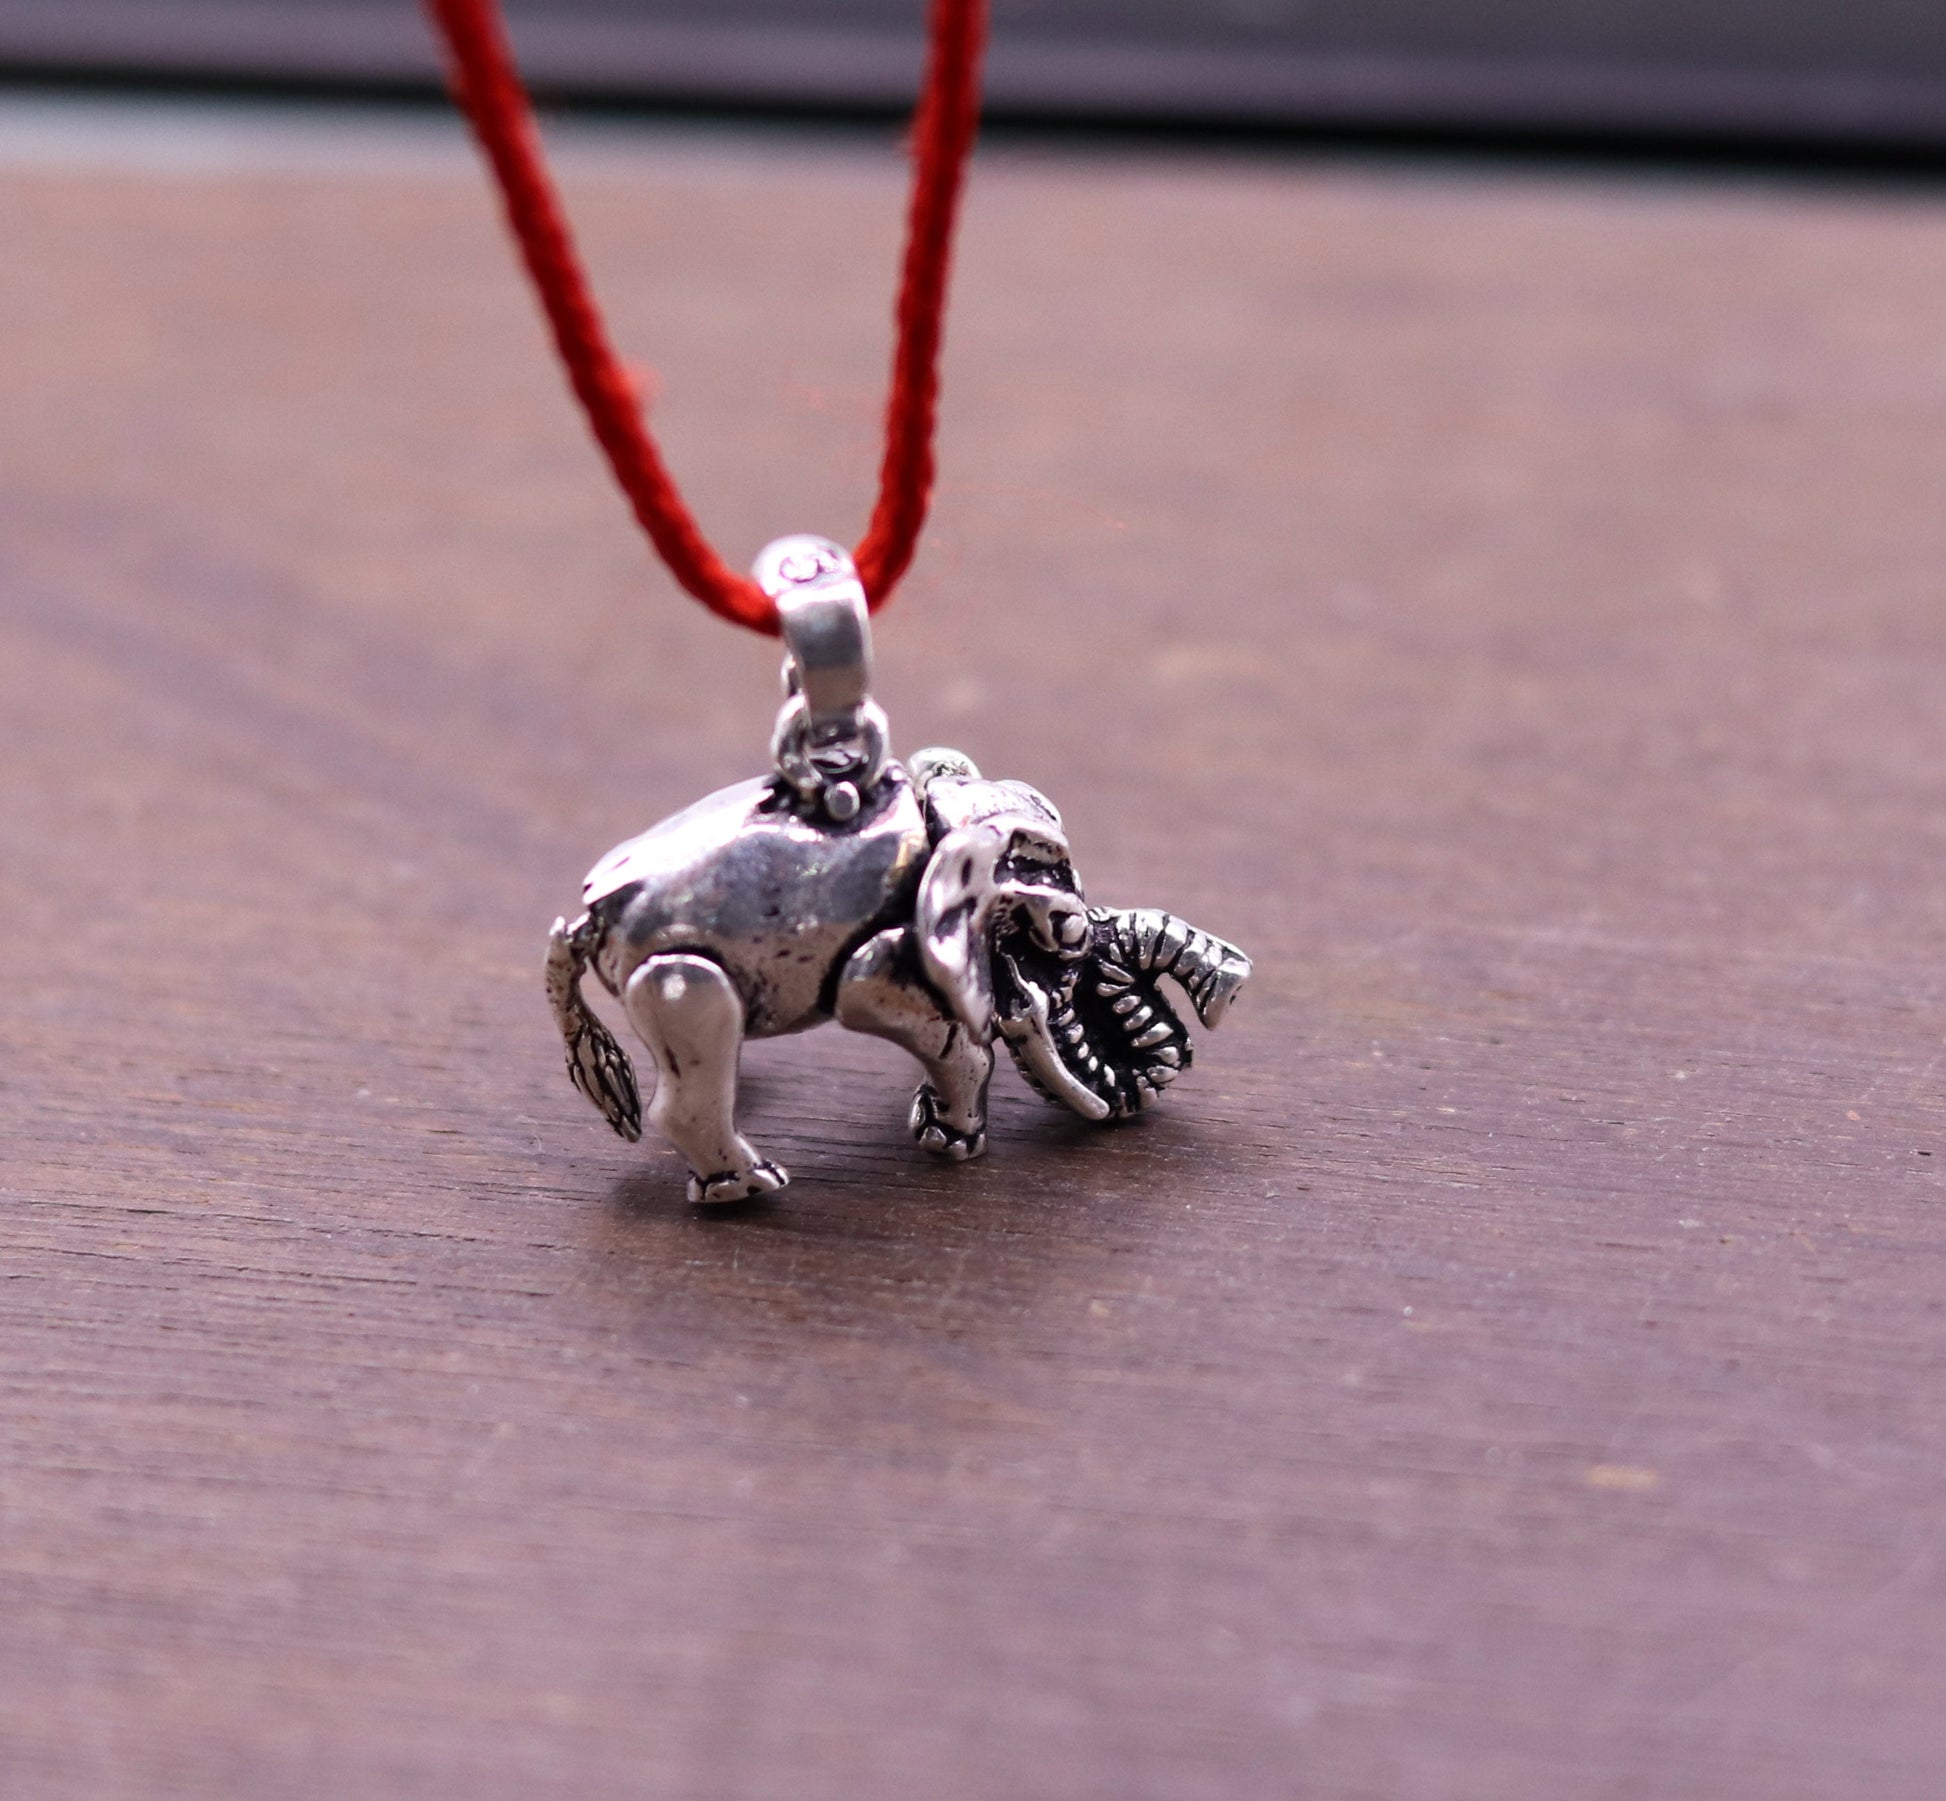 925 sterling silver amazing design little elephant pendant with movable legs flexible pendant necklace gifting jewelry india nsp207 - TRIBAL ORNAMENTS